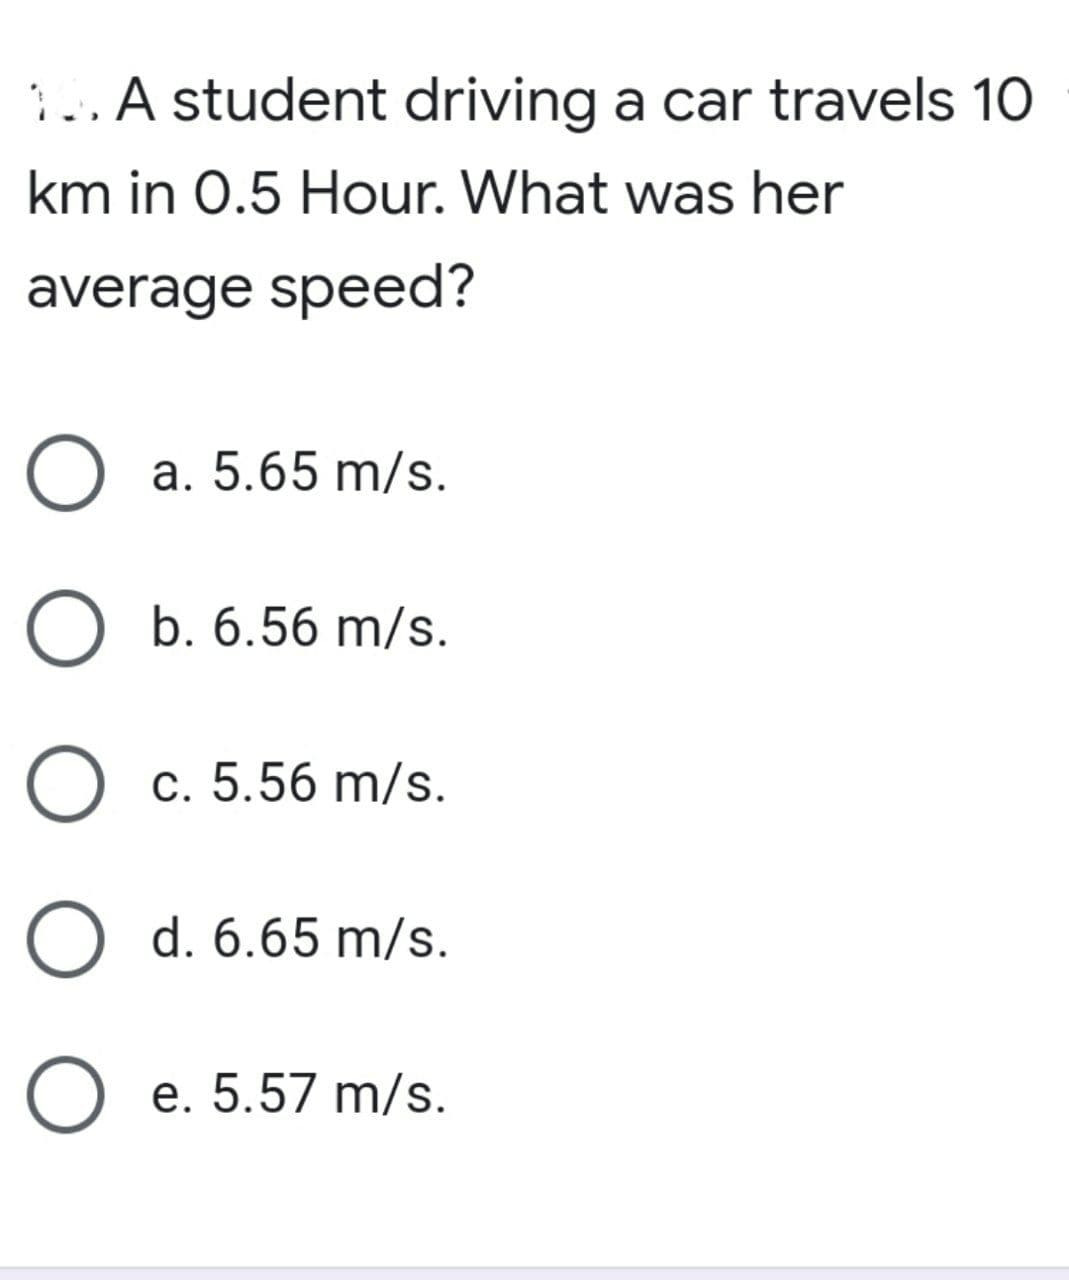 ..A student driving a car travels 10
km in 0.5 Hour. What was her
average speed?
O a. 5.65 m/s.
O b. 6.56 m/s.
O c. 5.56 m/s.
O d. 6.65 m/s.
O e. 5.57 m/s.
